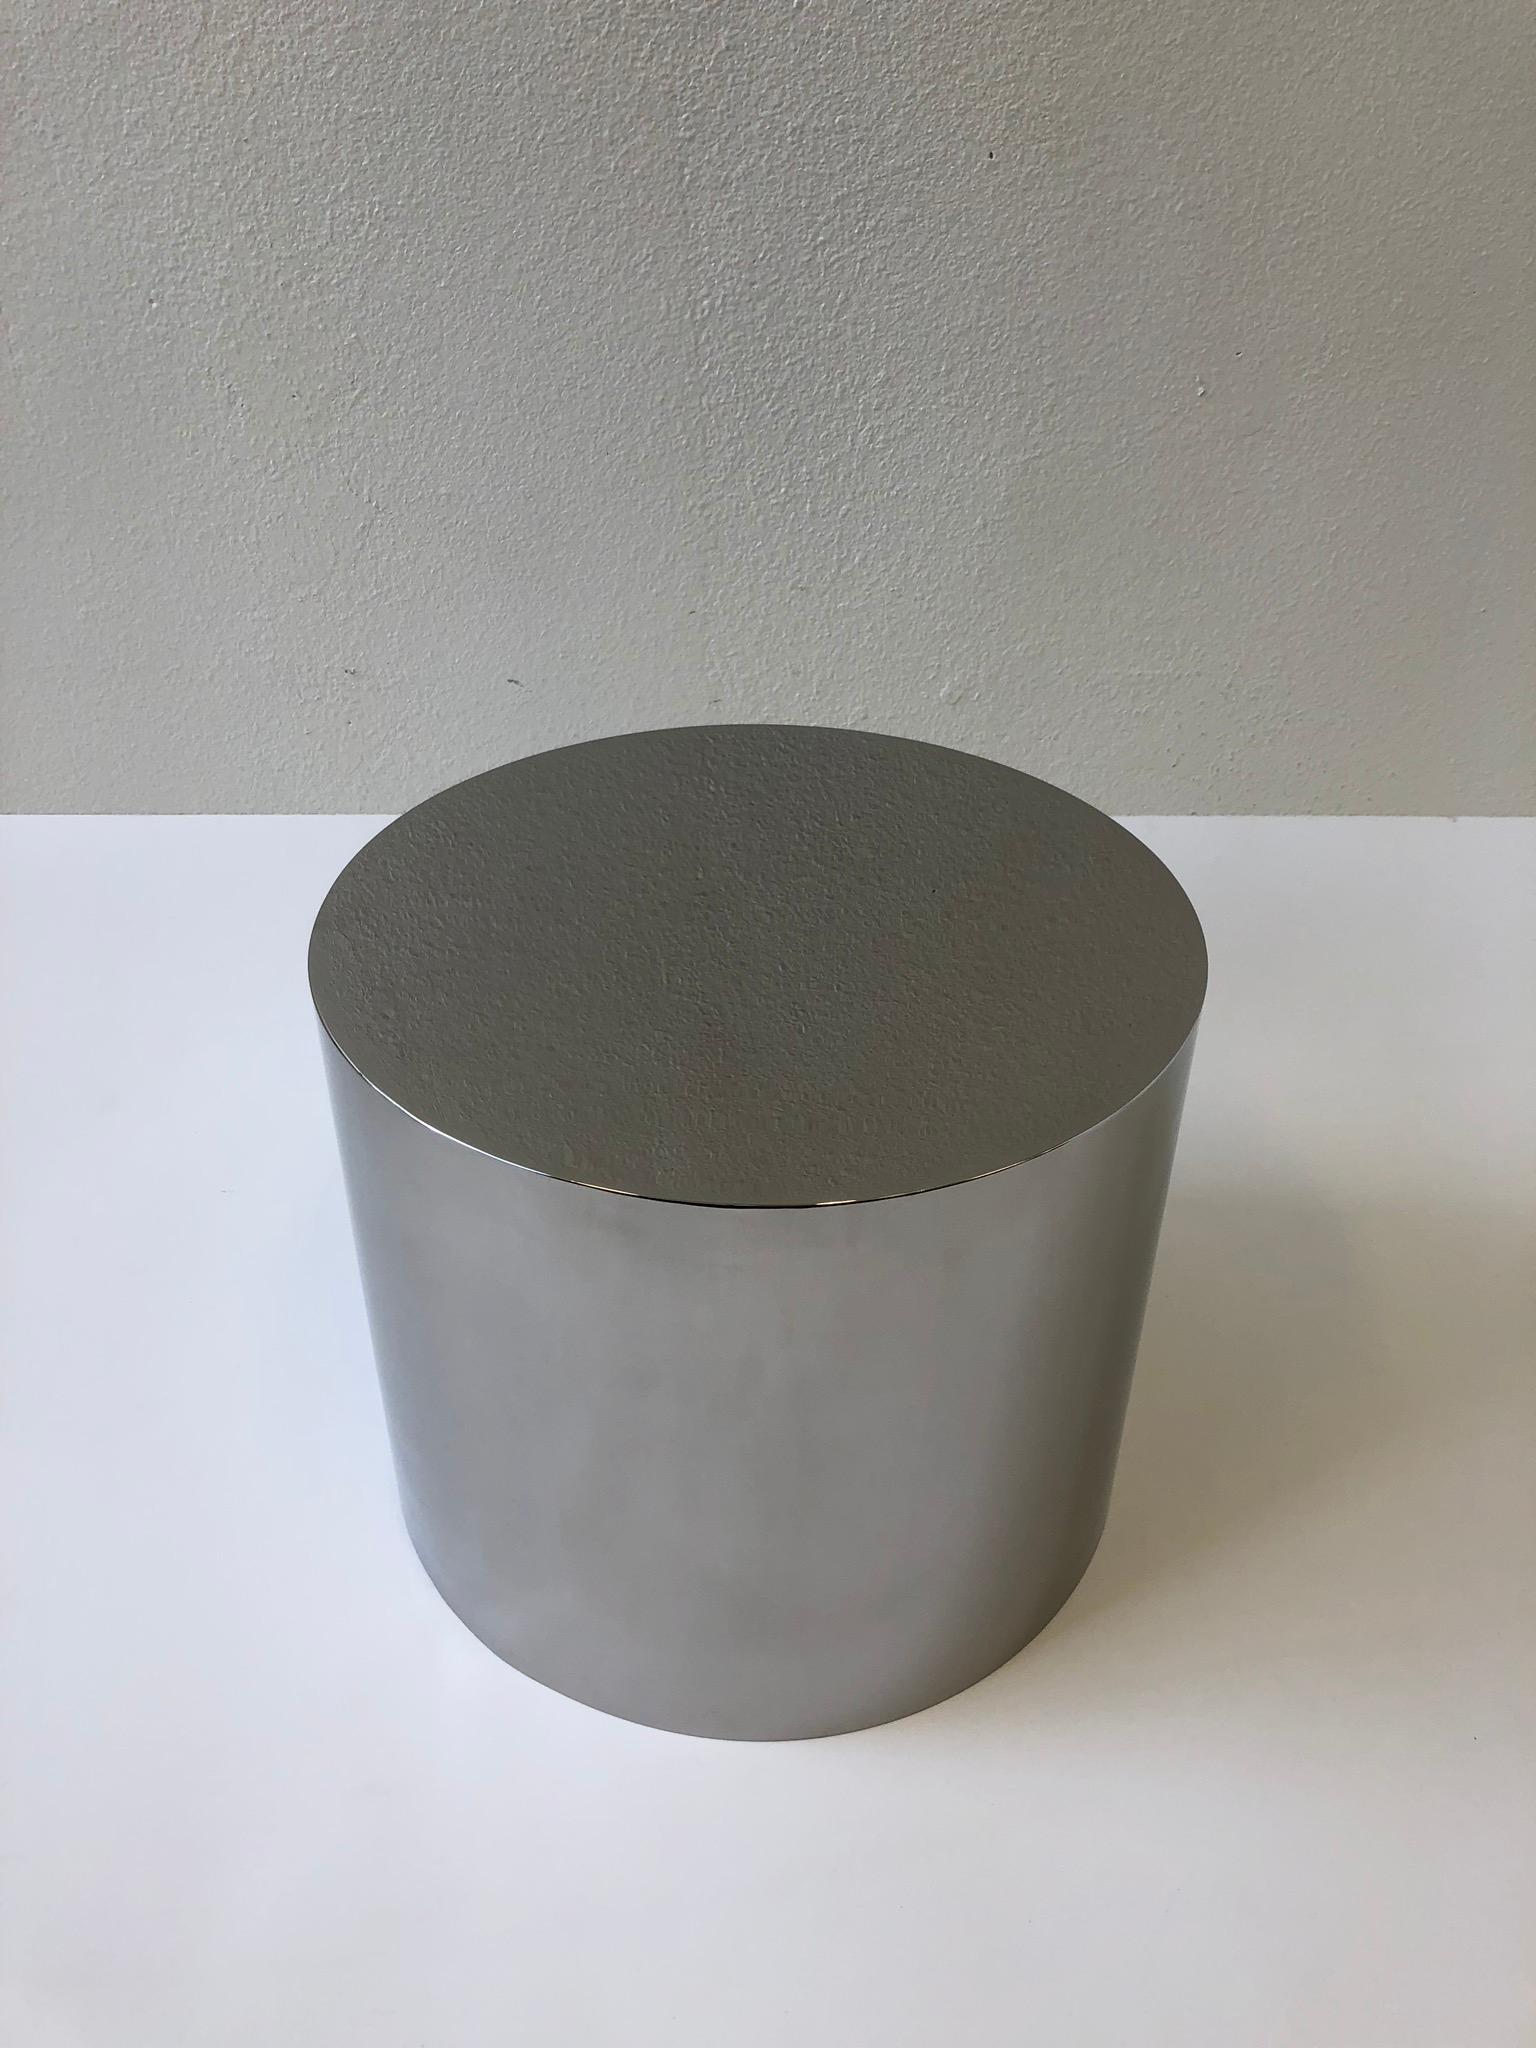 A 1980s polish stainless steel drum side table or cocktail table by Brueton. The drum is constructed of stainless steel and then mirror polished. The drum can be used by it self as a side table or a cocktail table with a glass top. The drum is